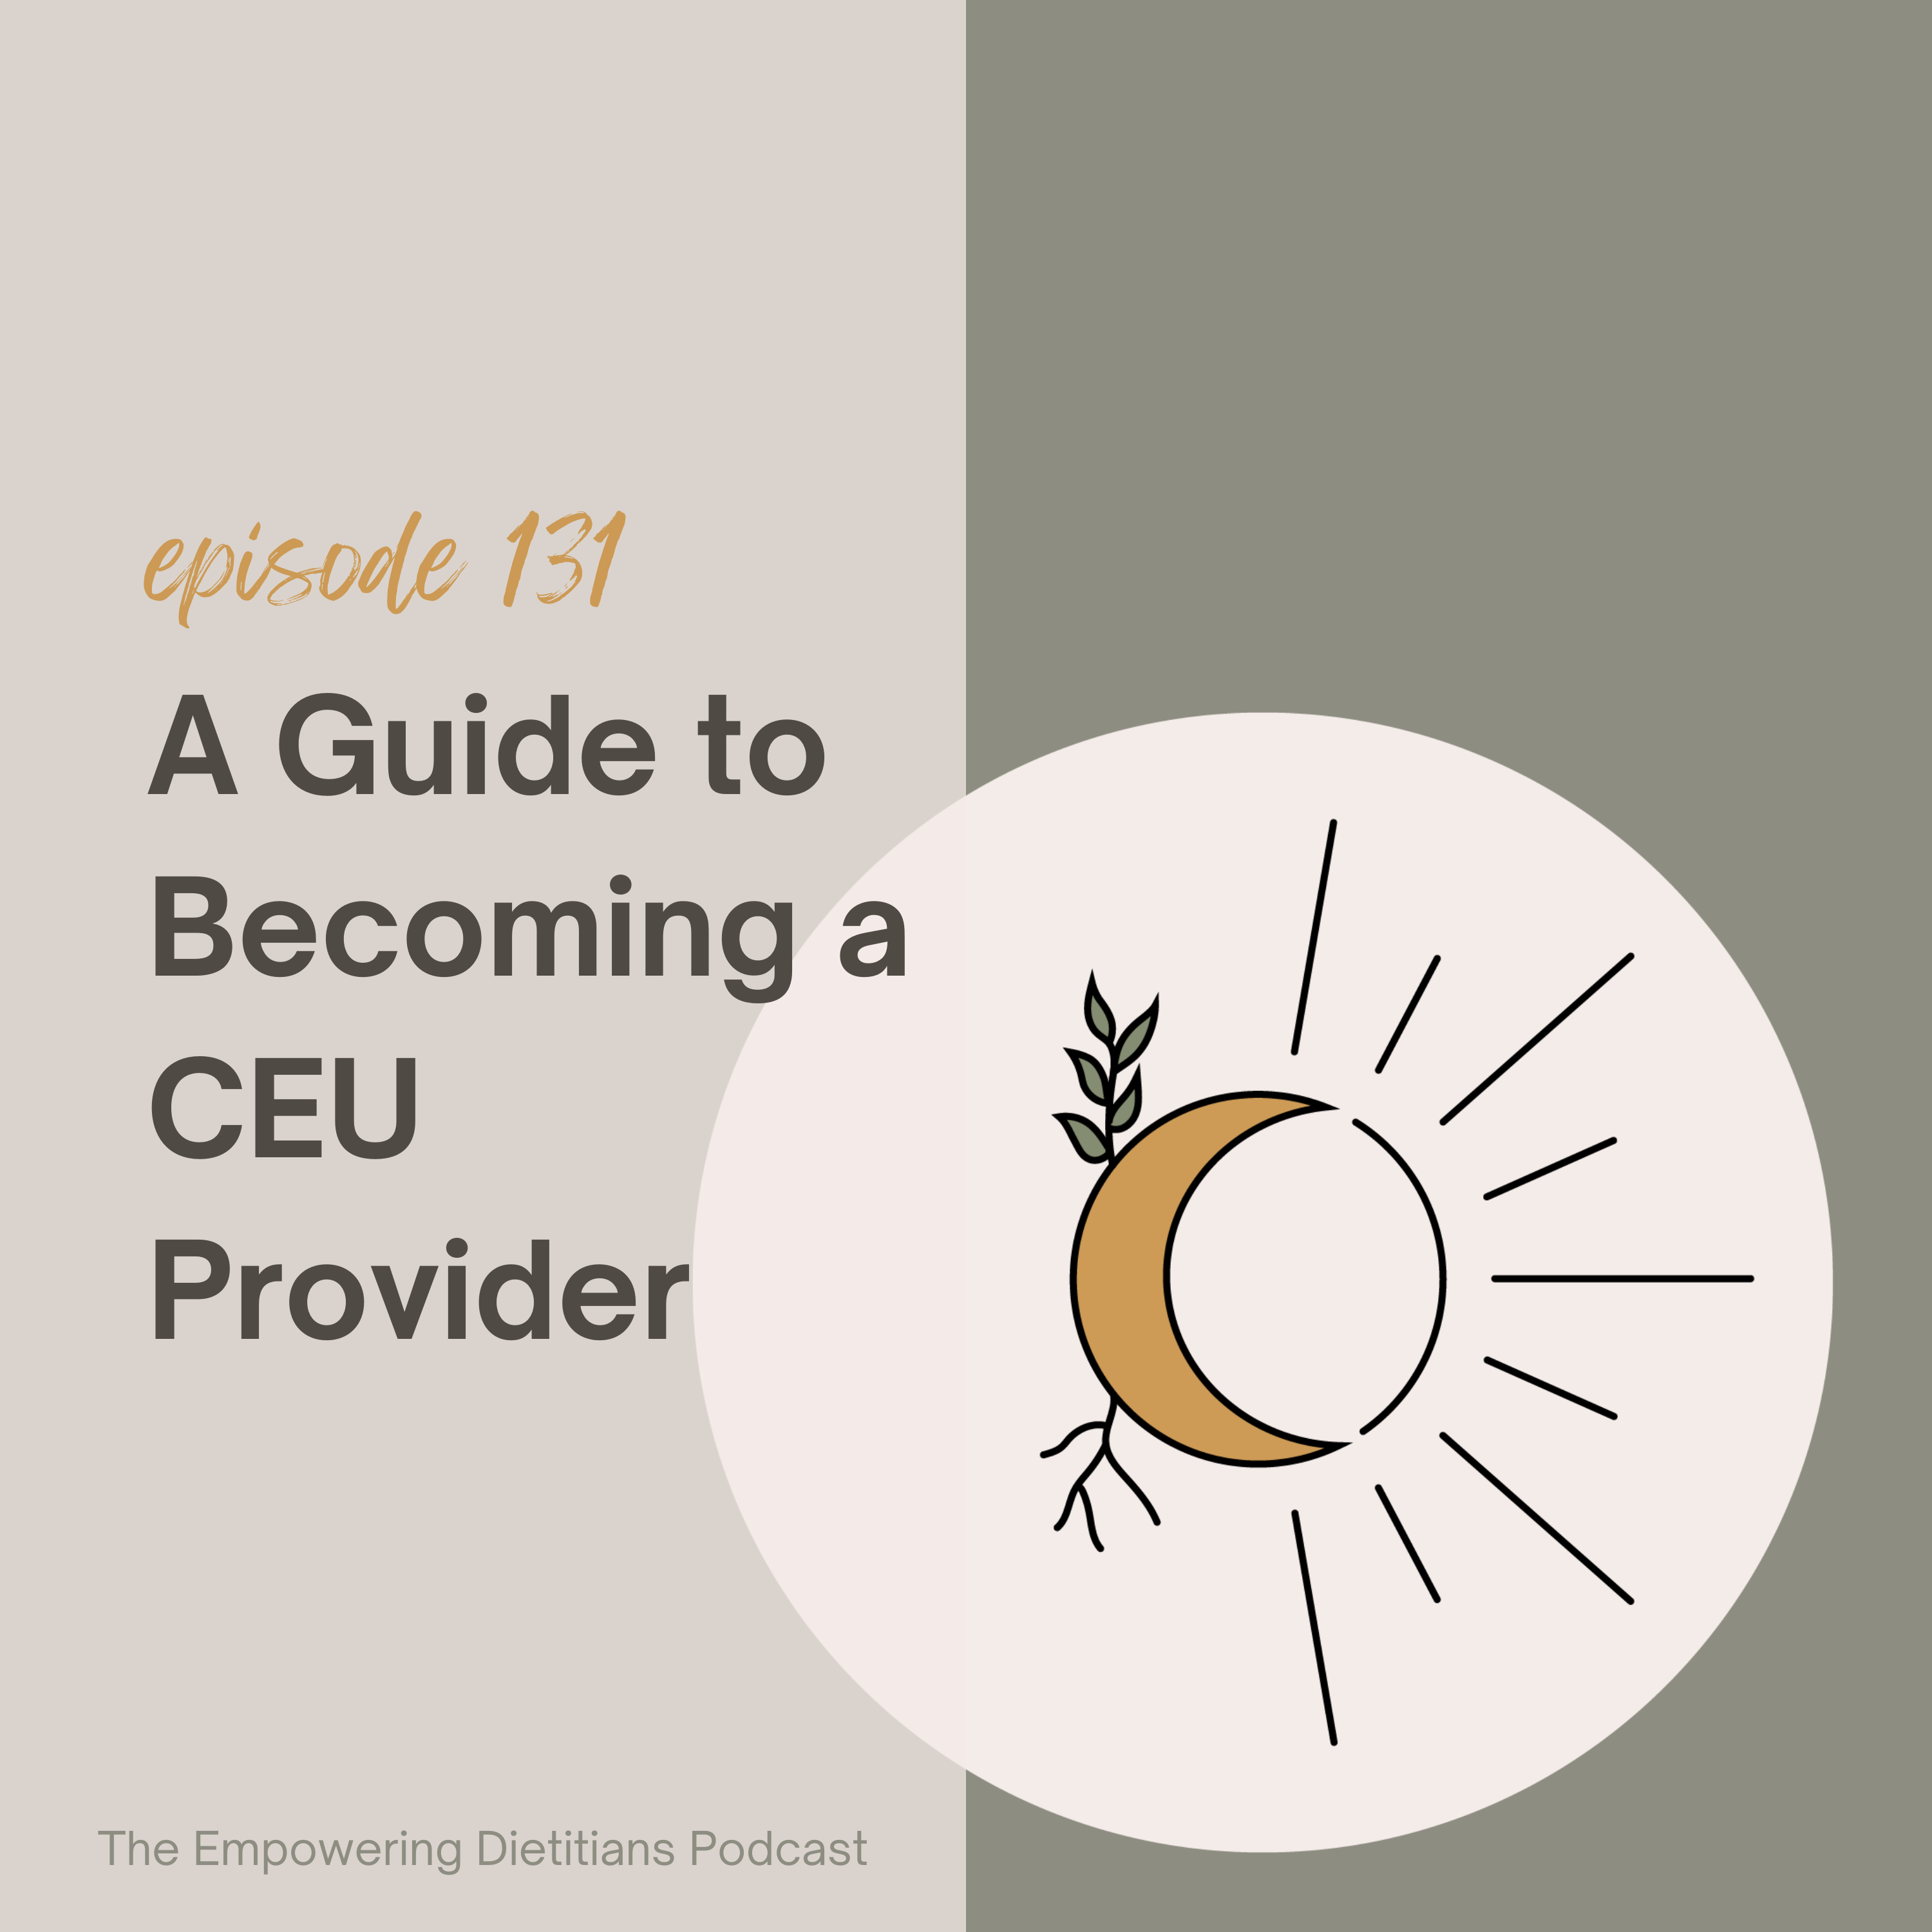 a guide to becoming a ceu provider